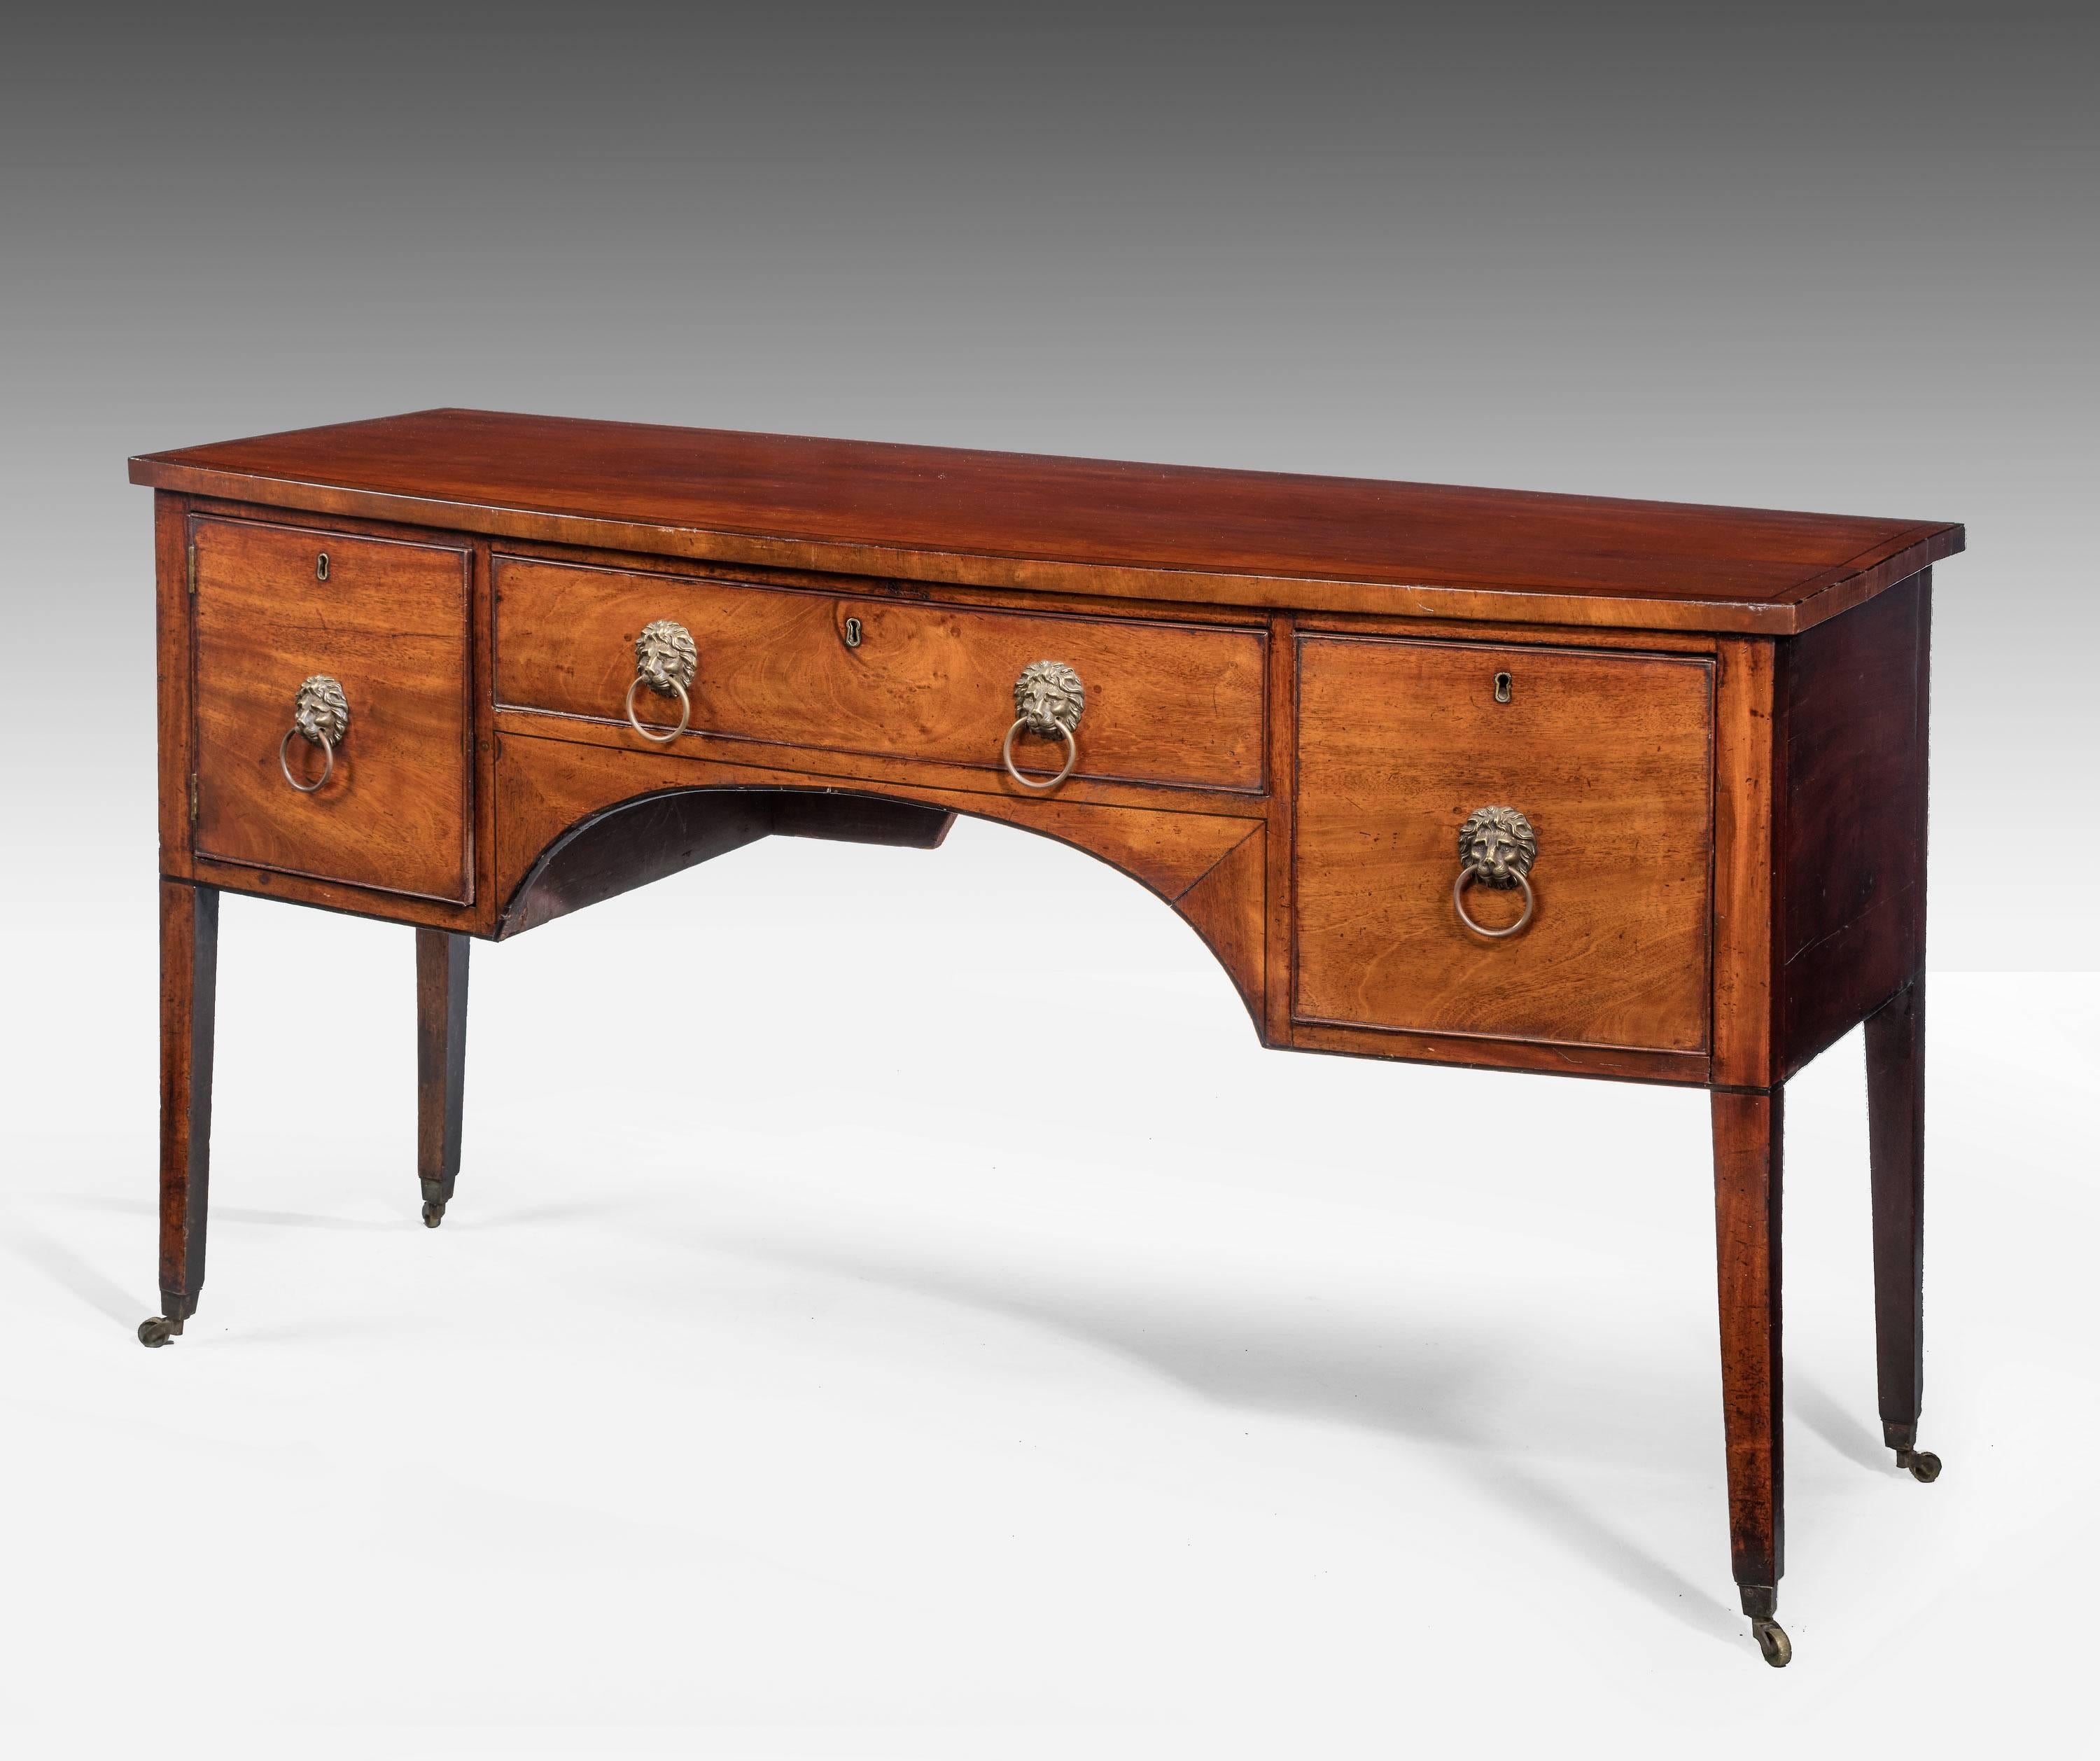 A George III period mahogany bow fronted sideboard, incorporating three drawers and on tapering square supports terminating in brass shoes and casters. Replaced but period lions mask handles beautifully cast. The top edge cross banded in matching